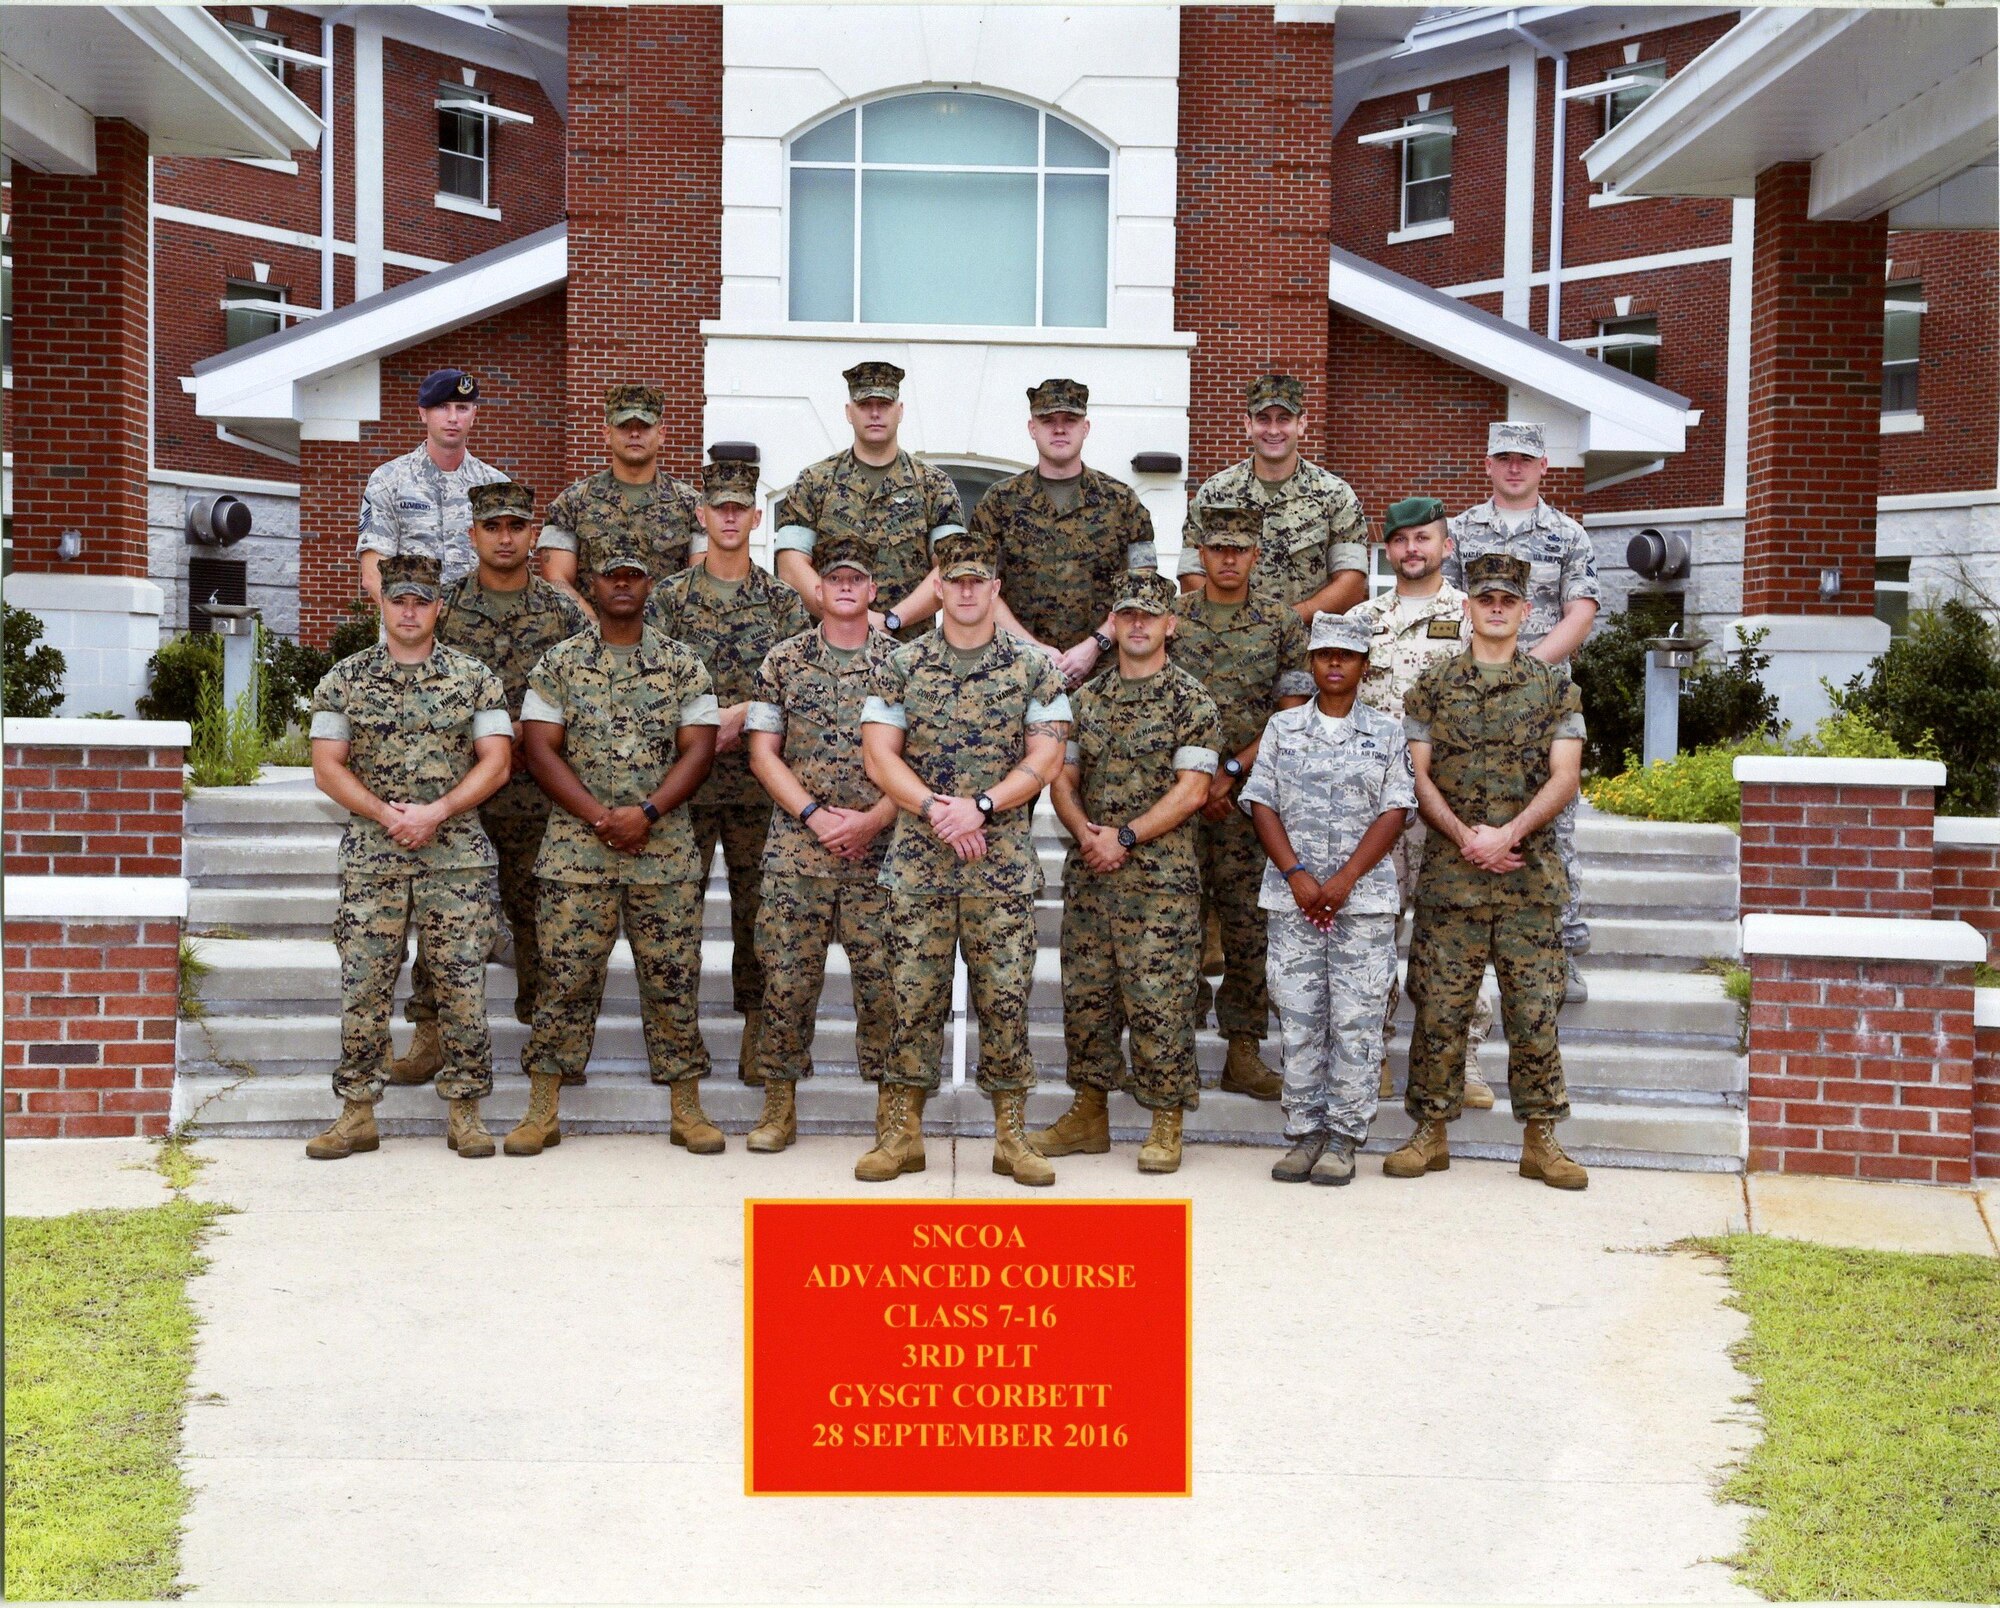 Master Sgt. Daniel Magas (top right) stands for a photo with the rest of his platoon at the U.S. Marine Corps Senior Noncommissioned Officer Academy Advanced Course Sept. 28 at Camp Lejeune, North Carolina. (USMC Courtesy photo)